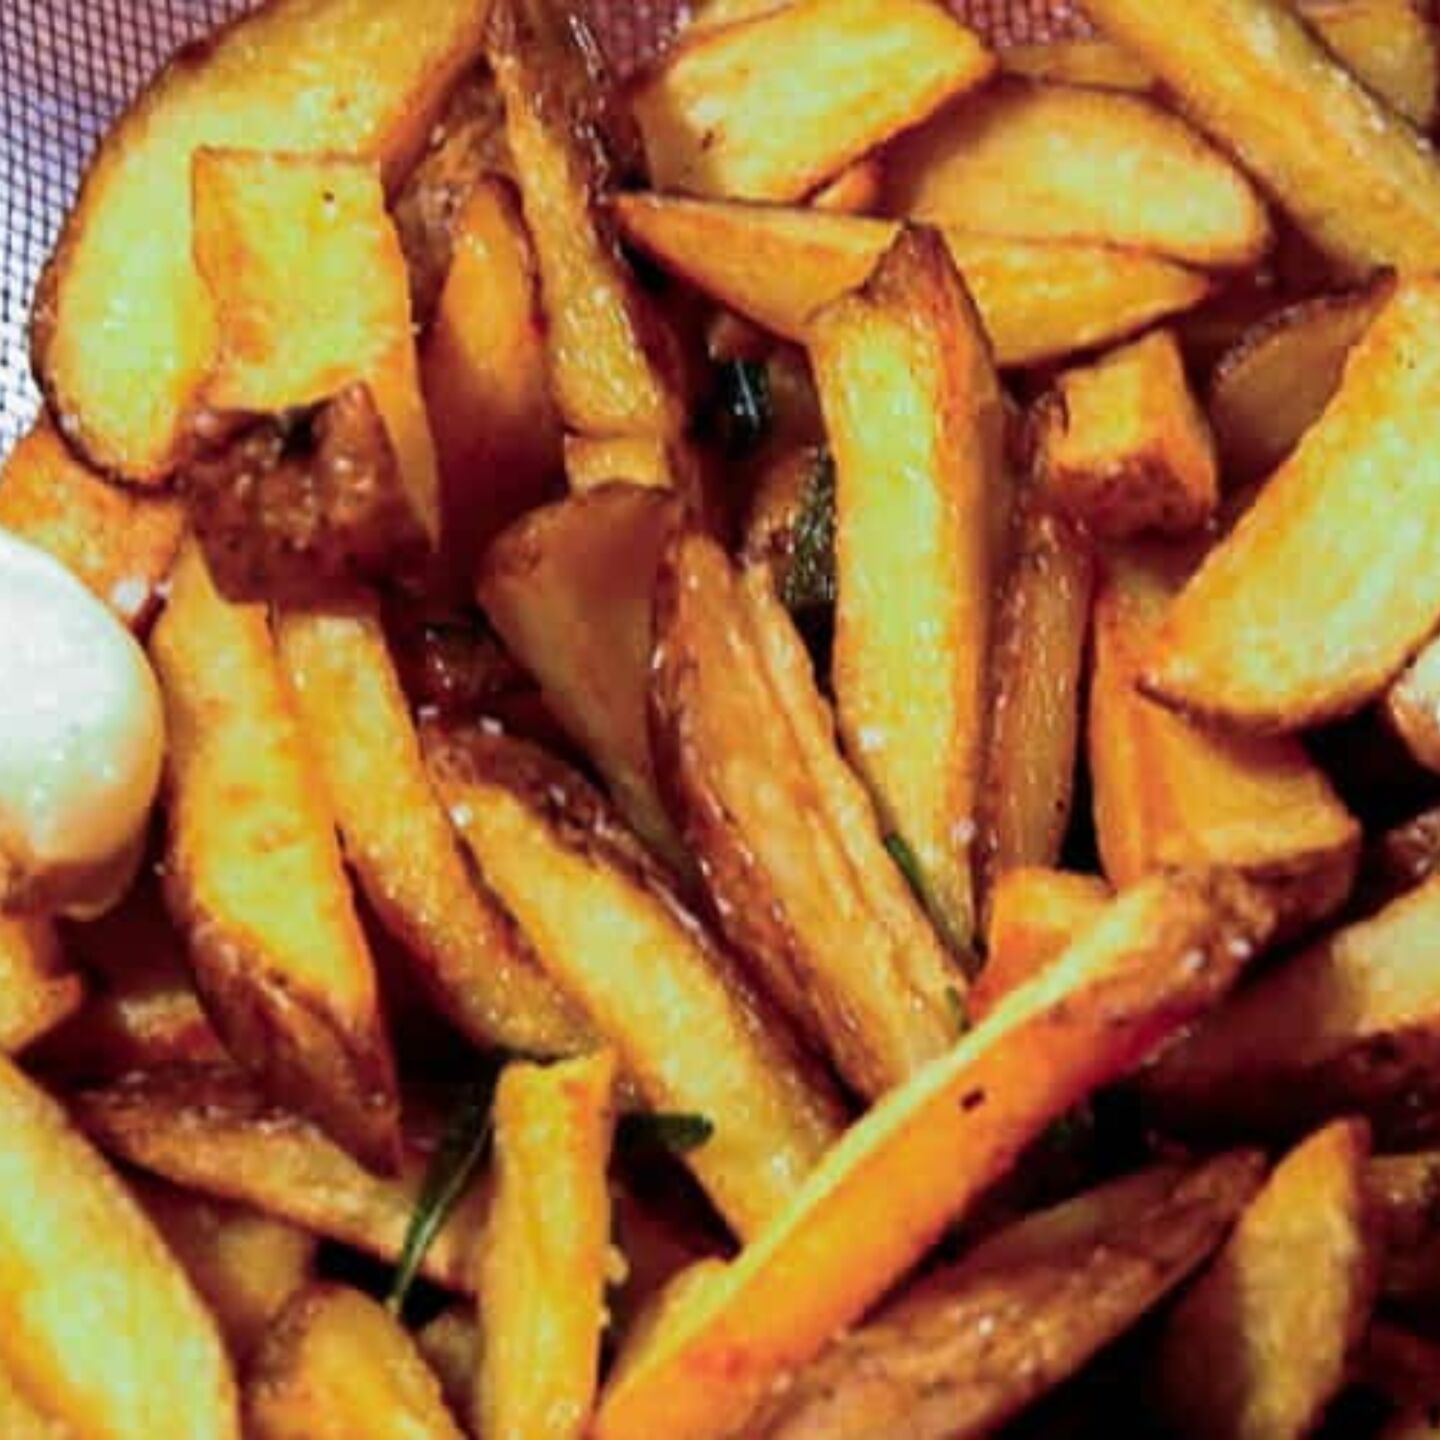 22. Italian style french fries with garlic and rosemary